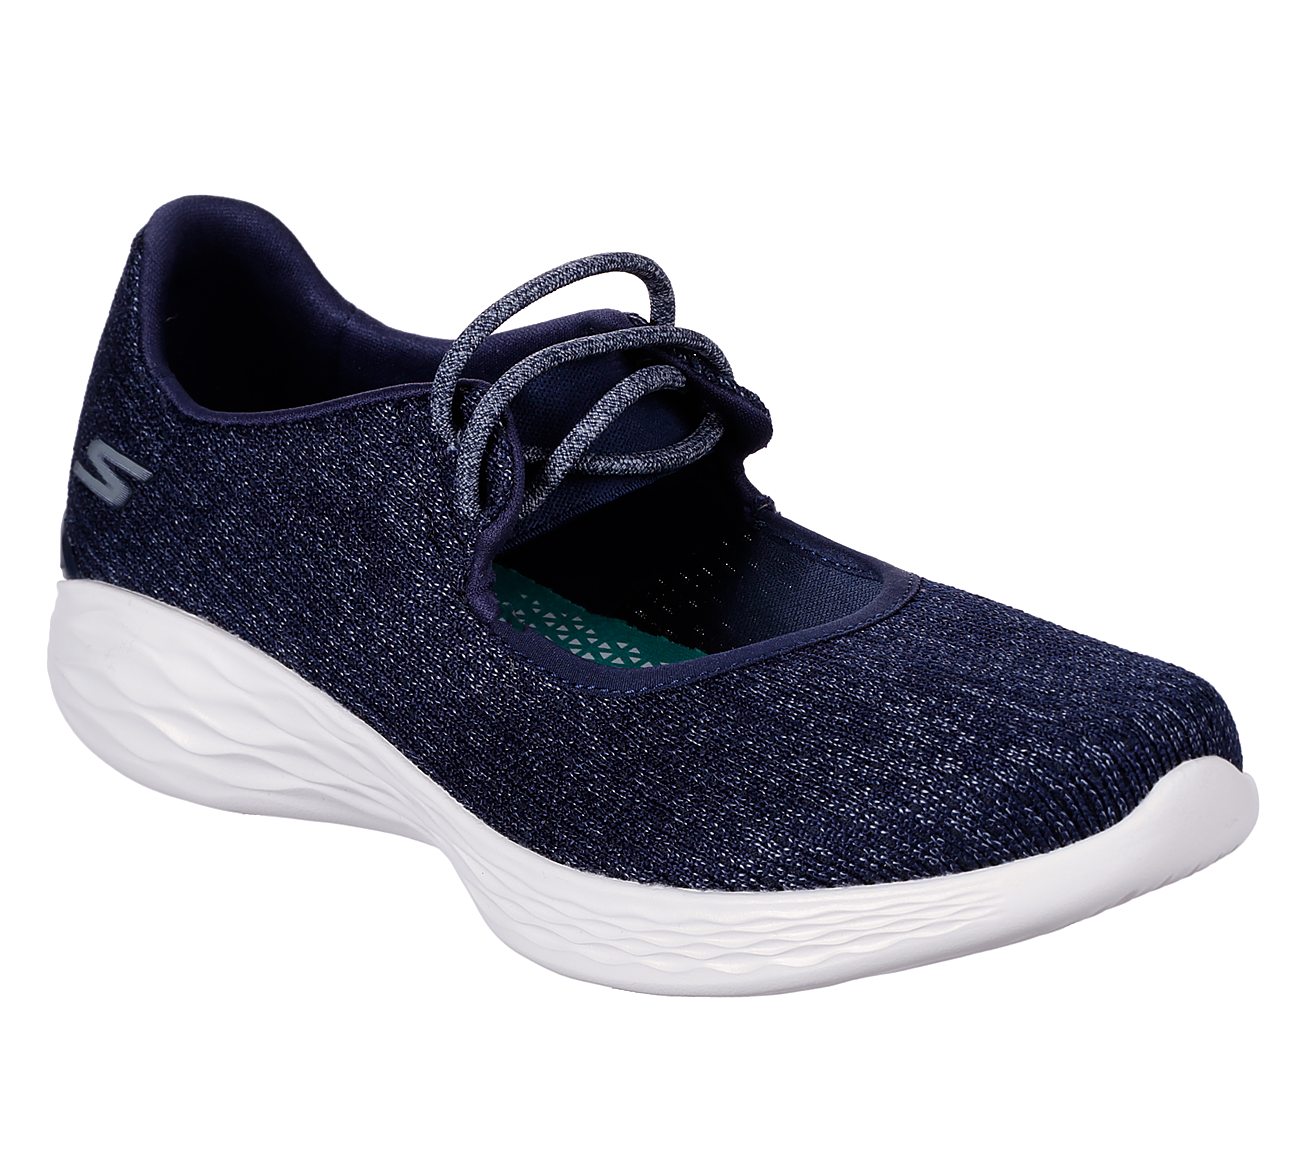 Impel YOU by skechers Shoes